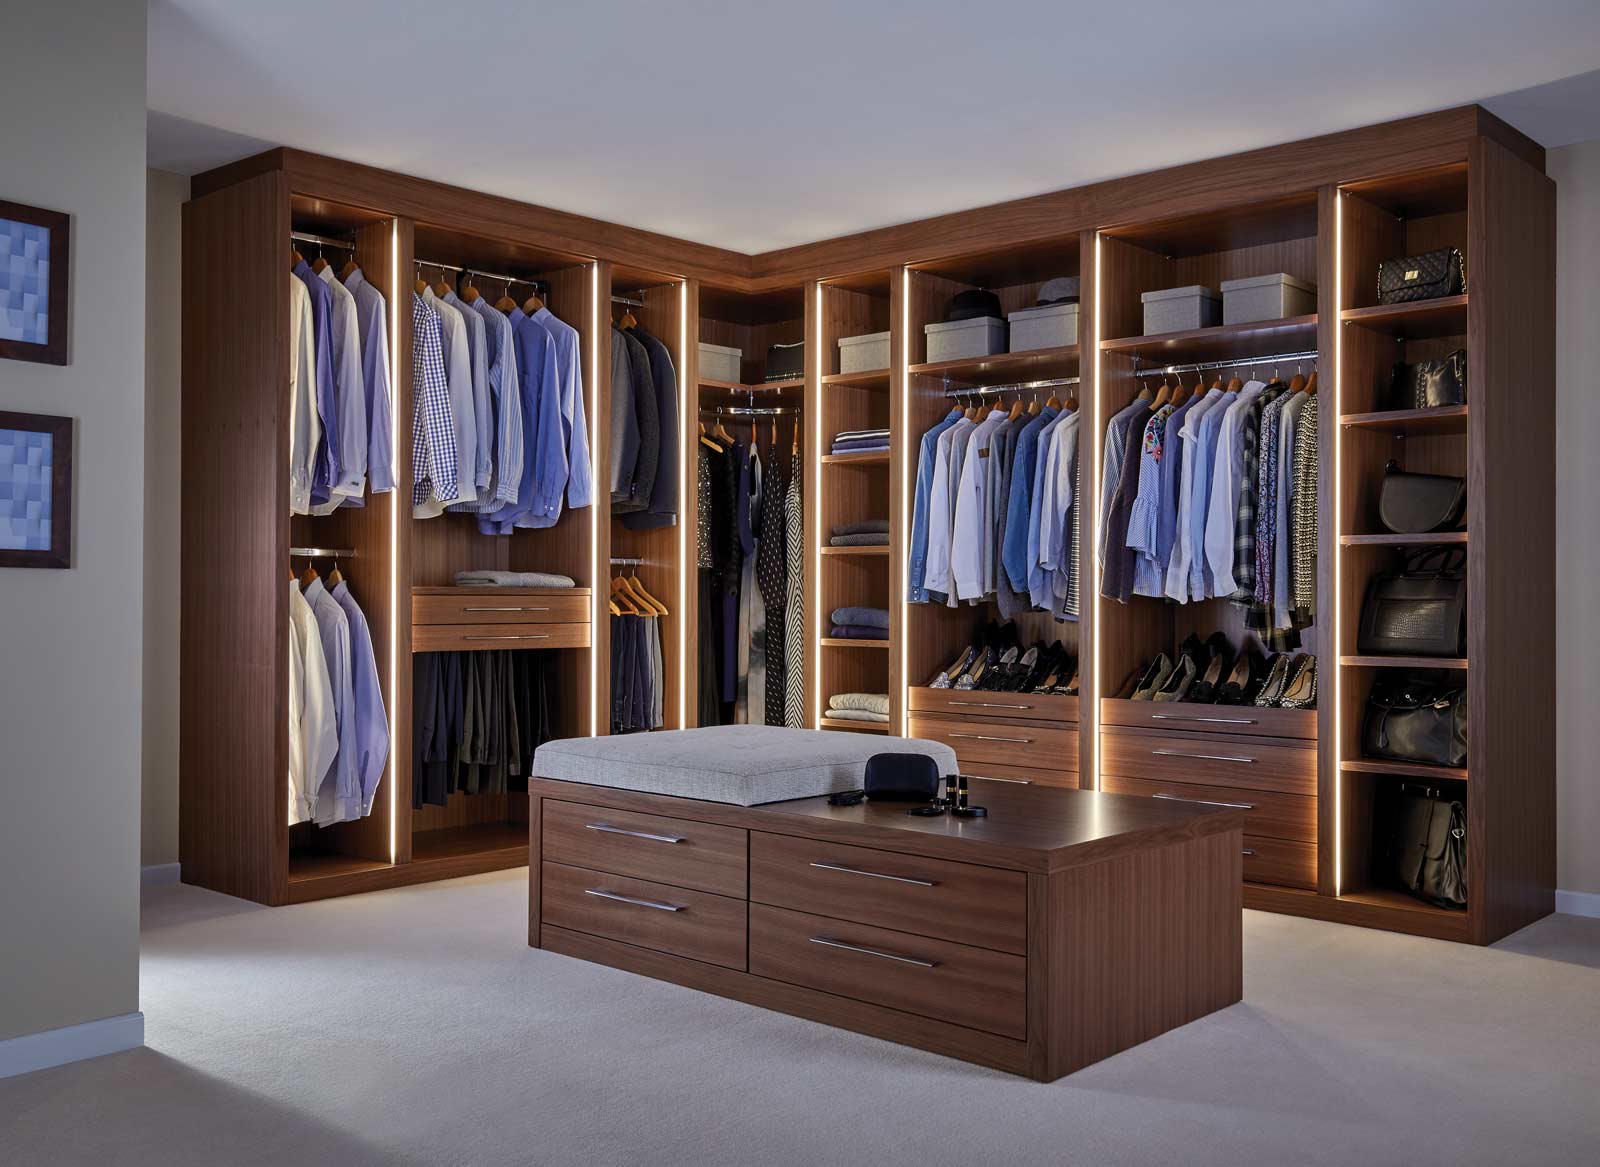 Bespoke Luxury Fitted Dressing Rooms Designs Handcrafted by Strachan